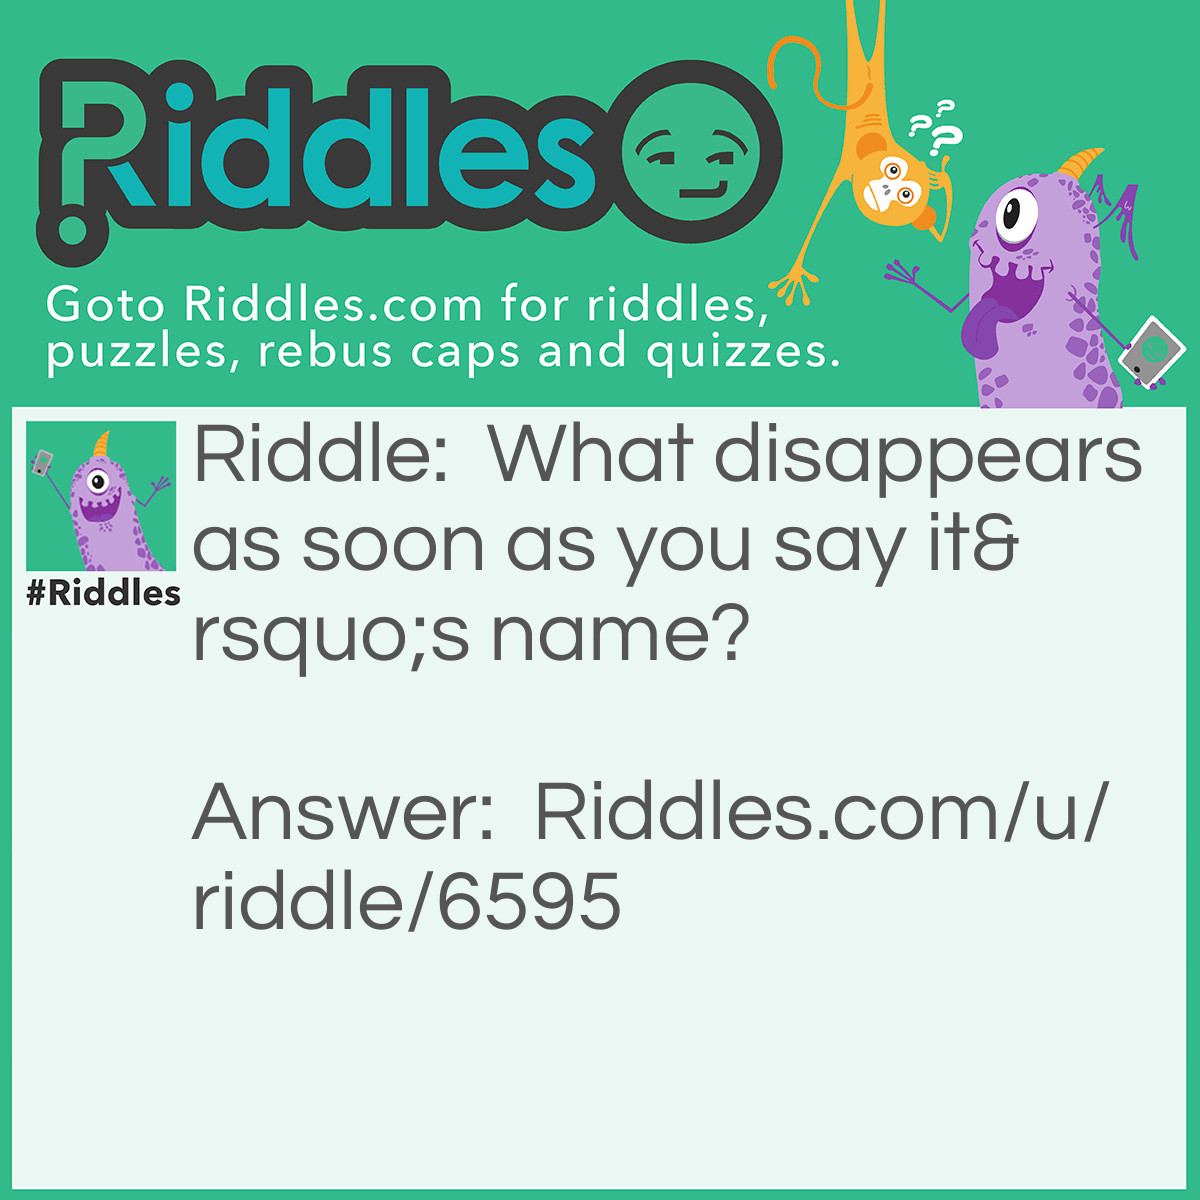 Riddle: What disappears as soon as you say it's name? Answer: Silence.